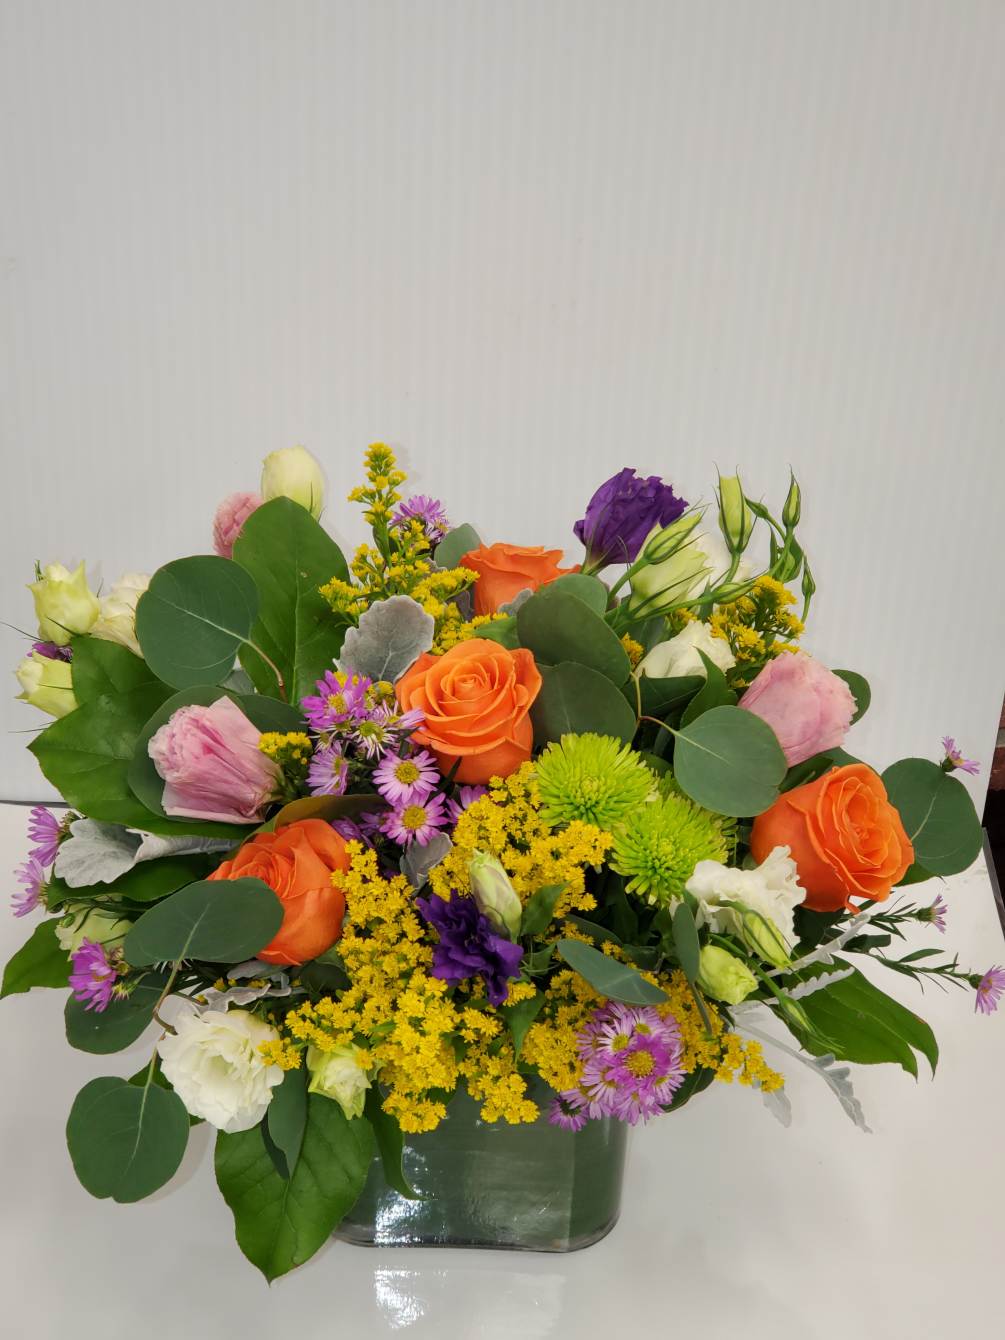 A gorgeous beautiful mix flower arrangement to share your love with others.